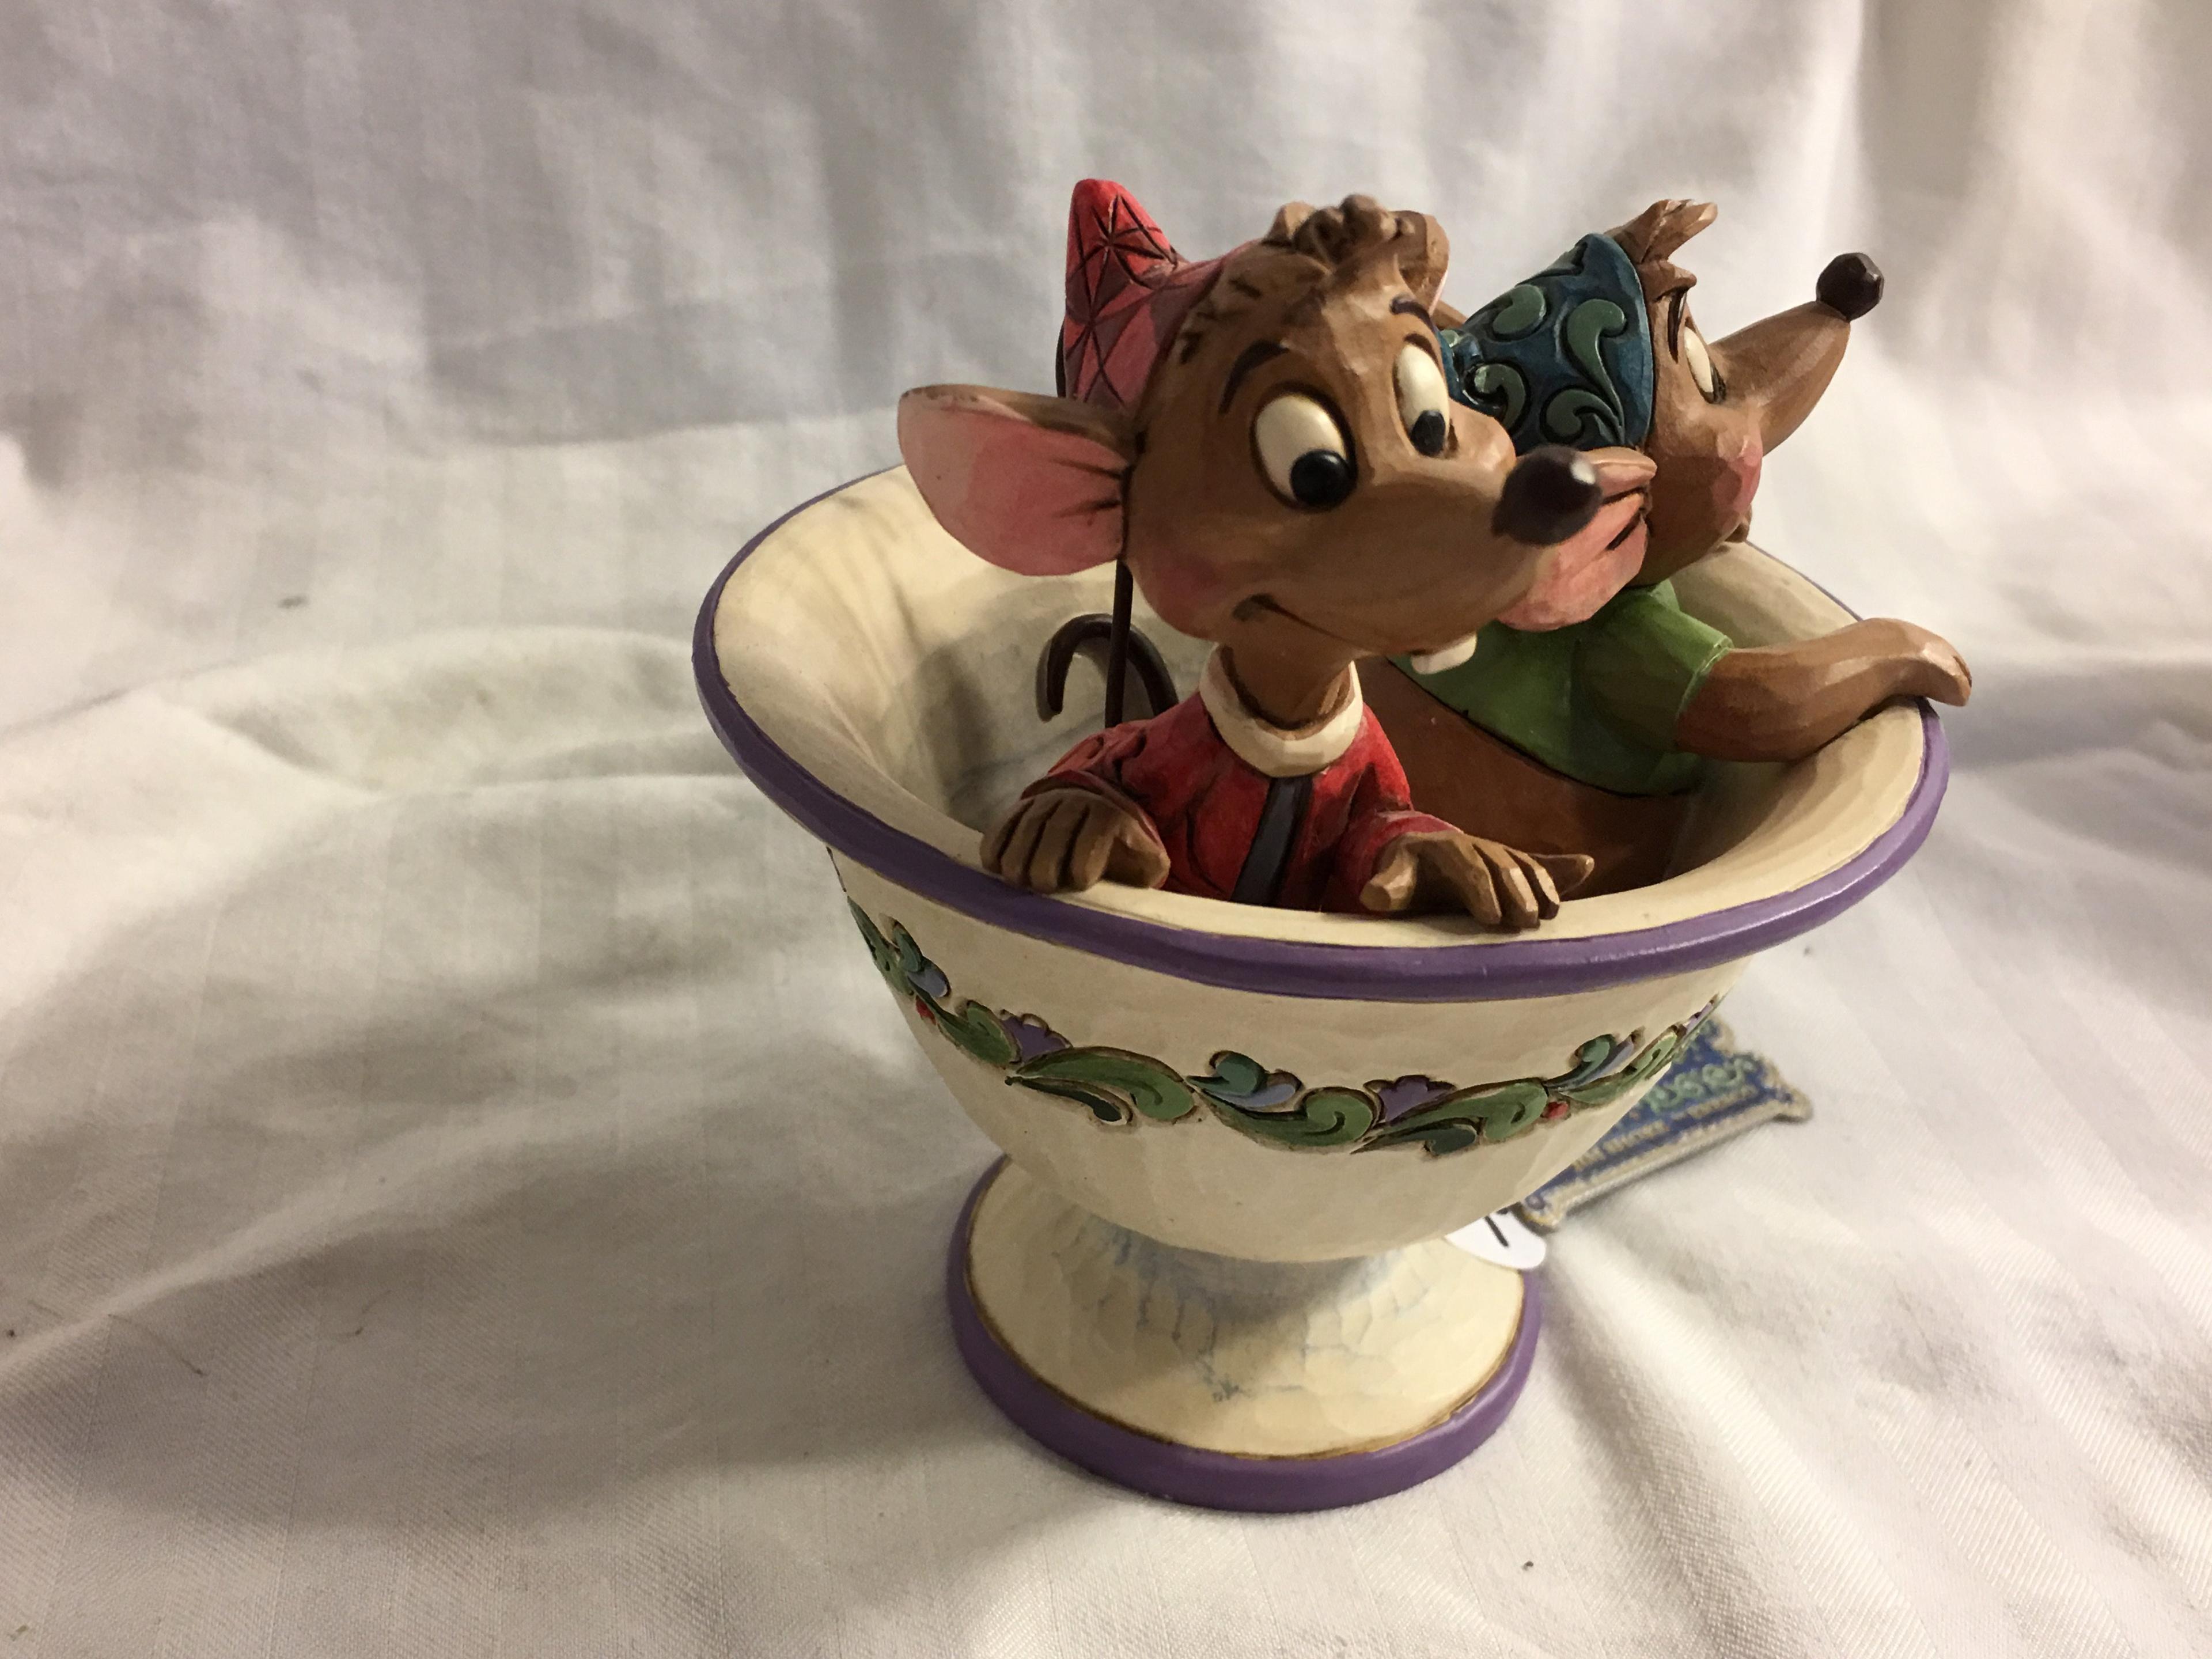 Collector Disney Tradition Jim Shore Enesco Figurine "Jag and Gus" Tea For Two" Size:4.3/4"tall